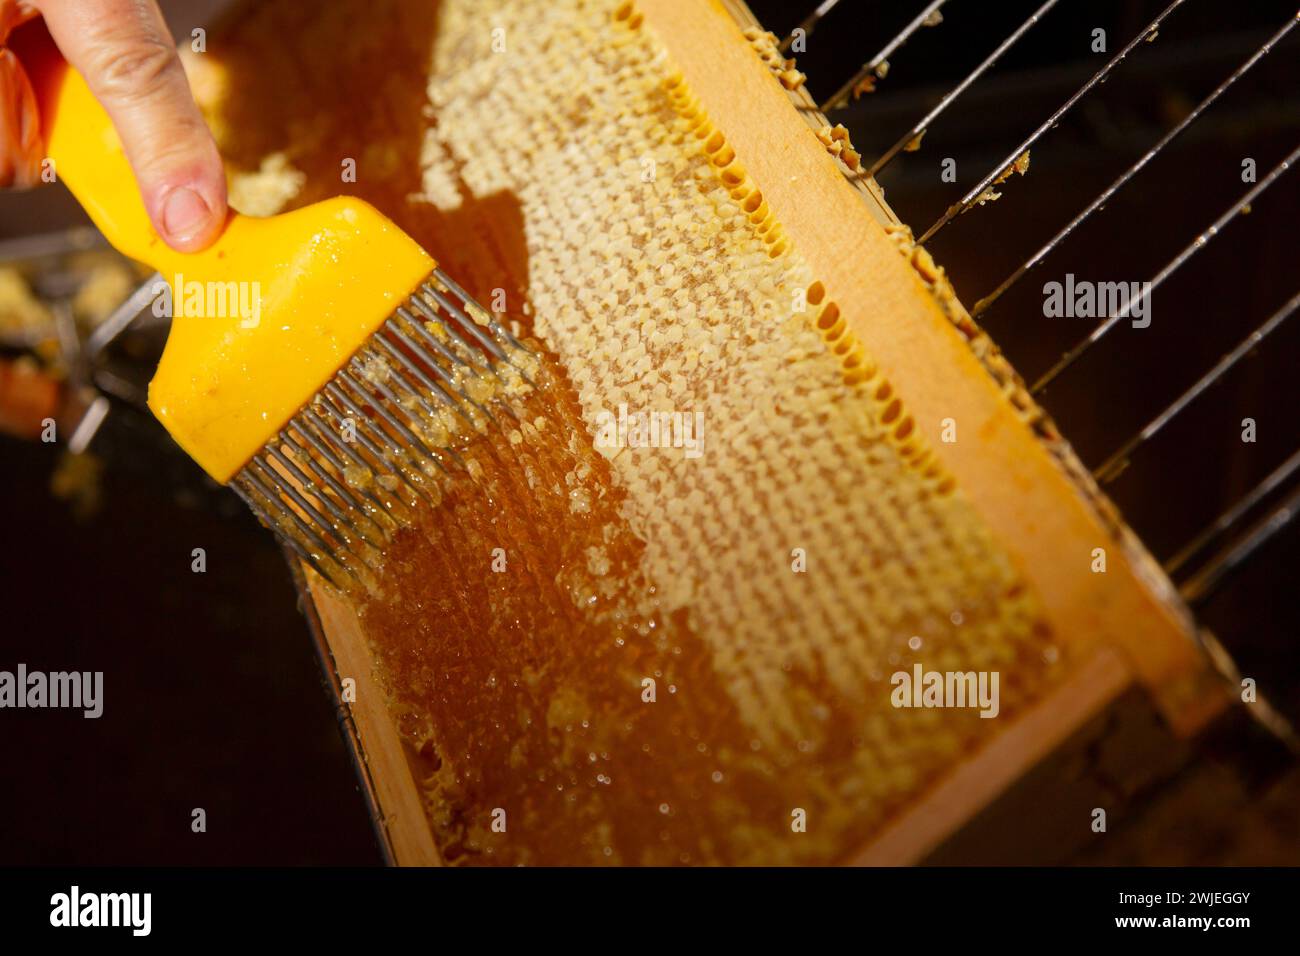 Beekeeping in Monetier-les-Bains, in the French-Alps: beekeeper uncapping a honey frame with a fork Stock Photo